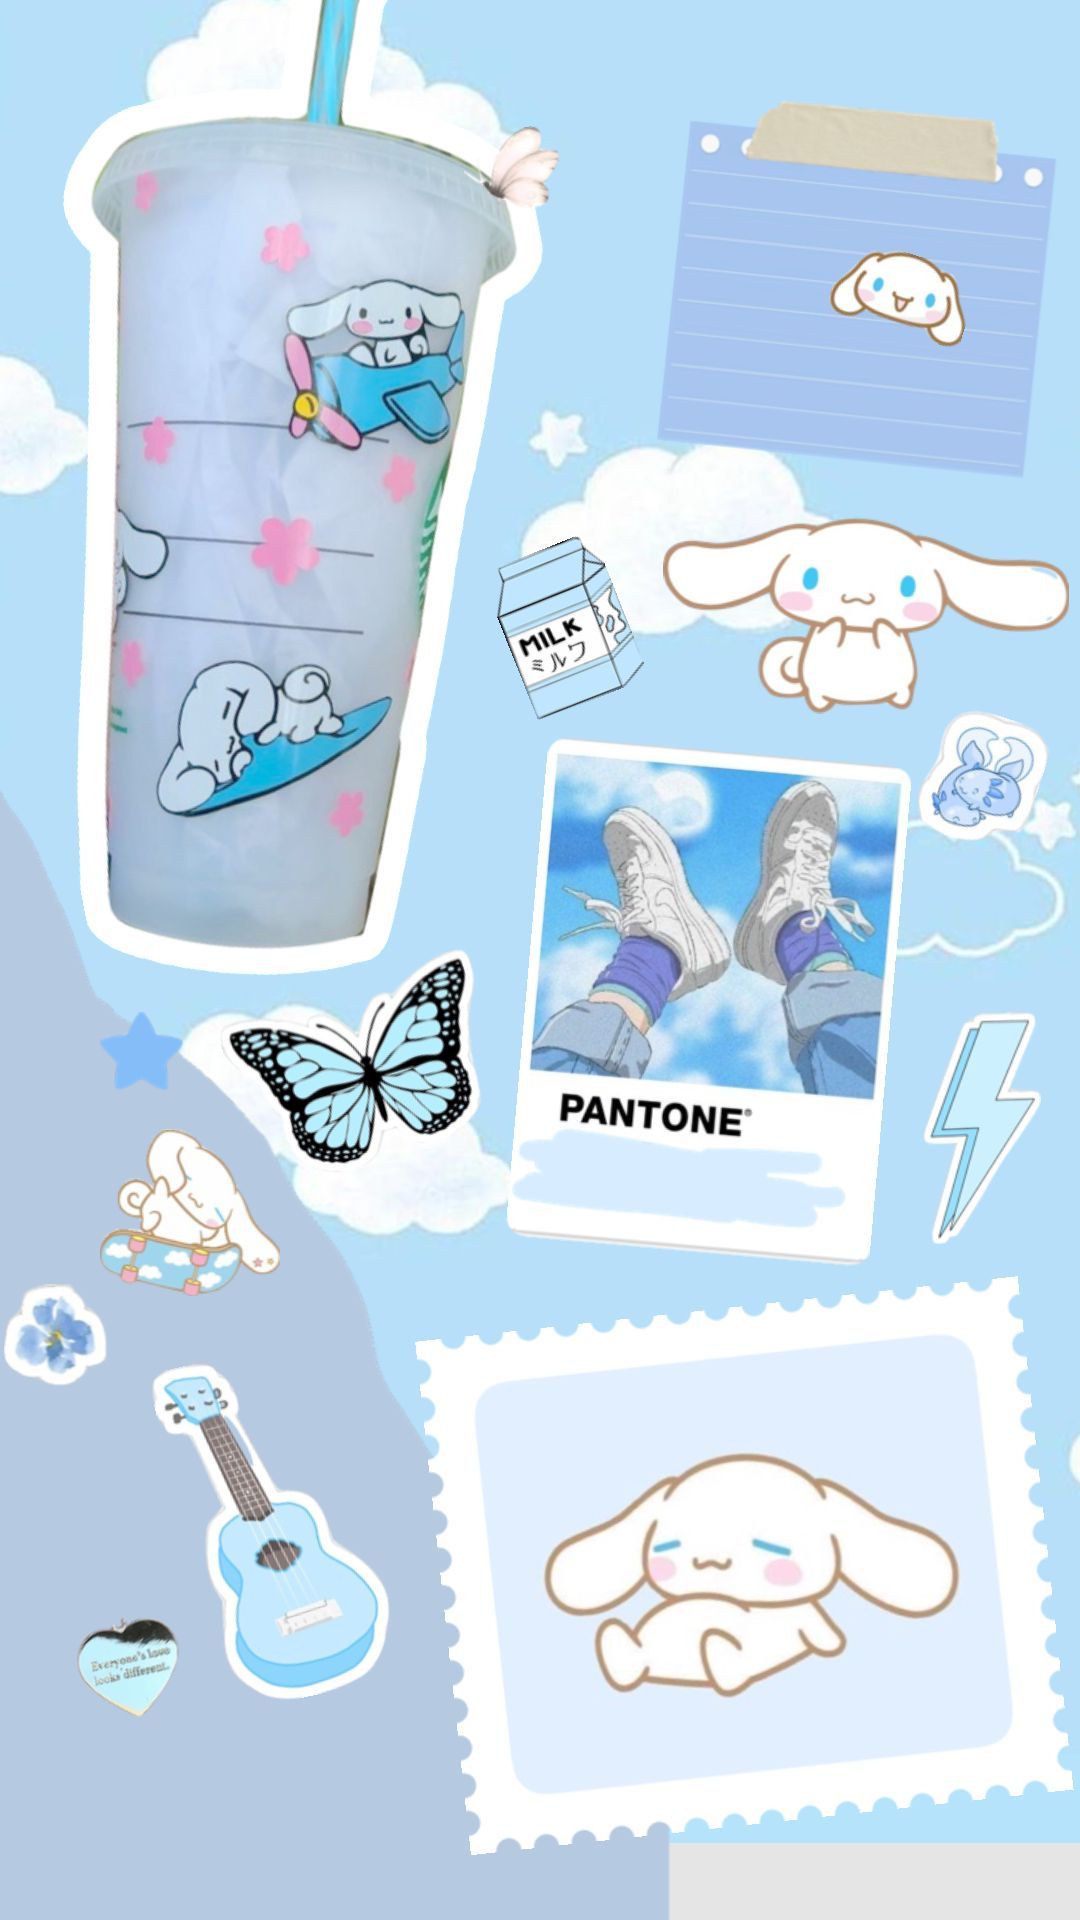 IPhone wallpaper of blue aesthetic with cute illustrations of animals, butterfly, guitar, and cloud. - Cinnamoroll